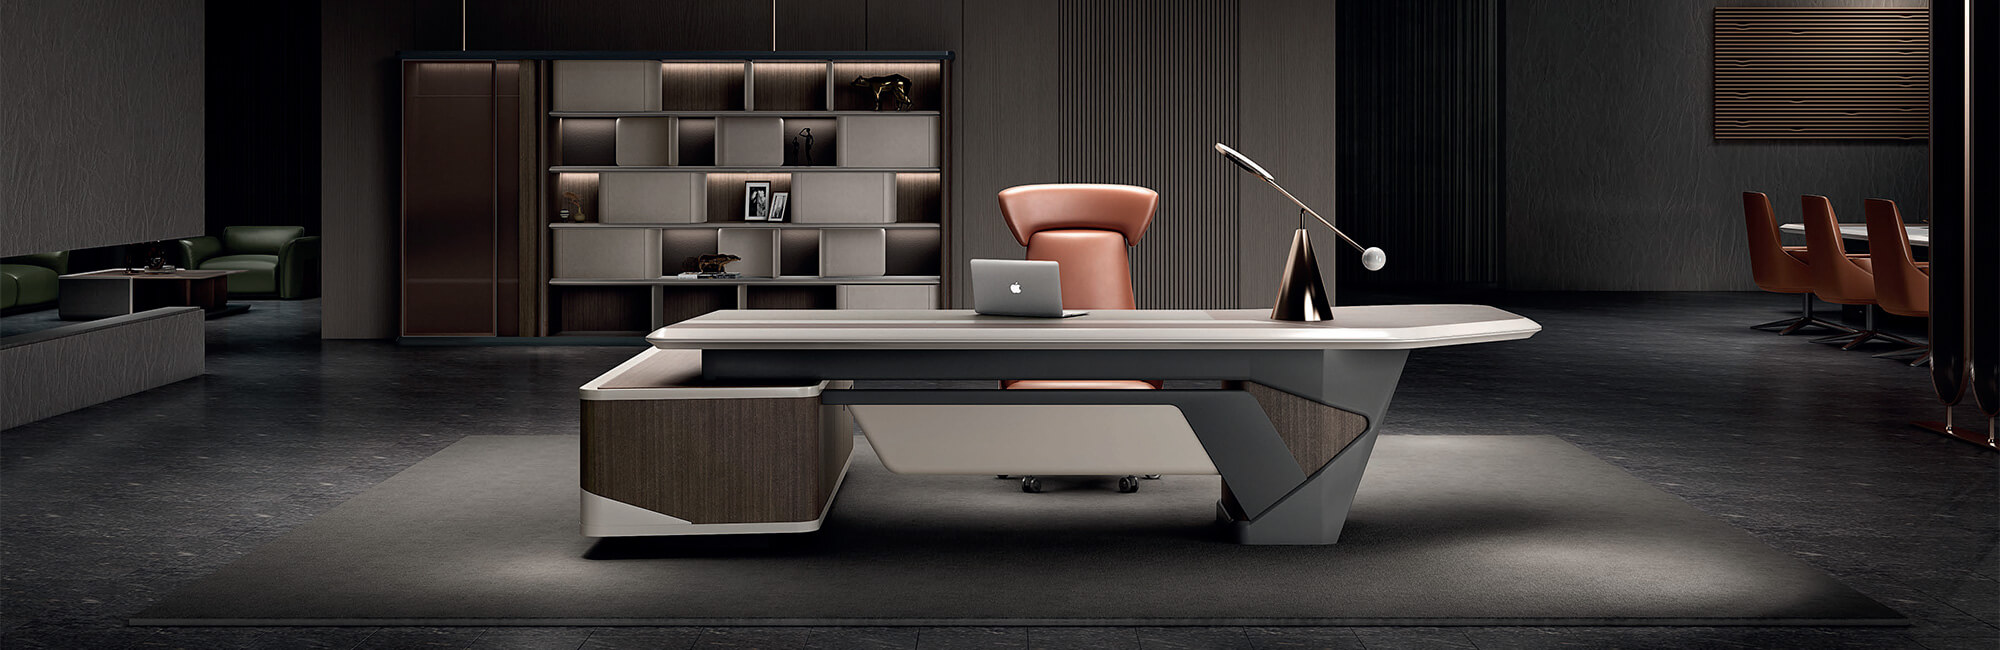 maddison-series-executive-furniture-for-office-space